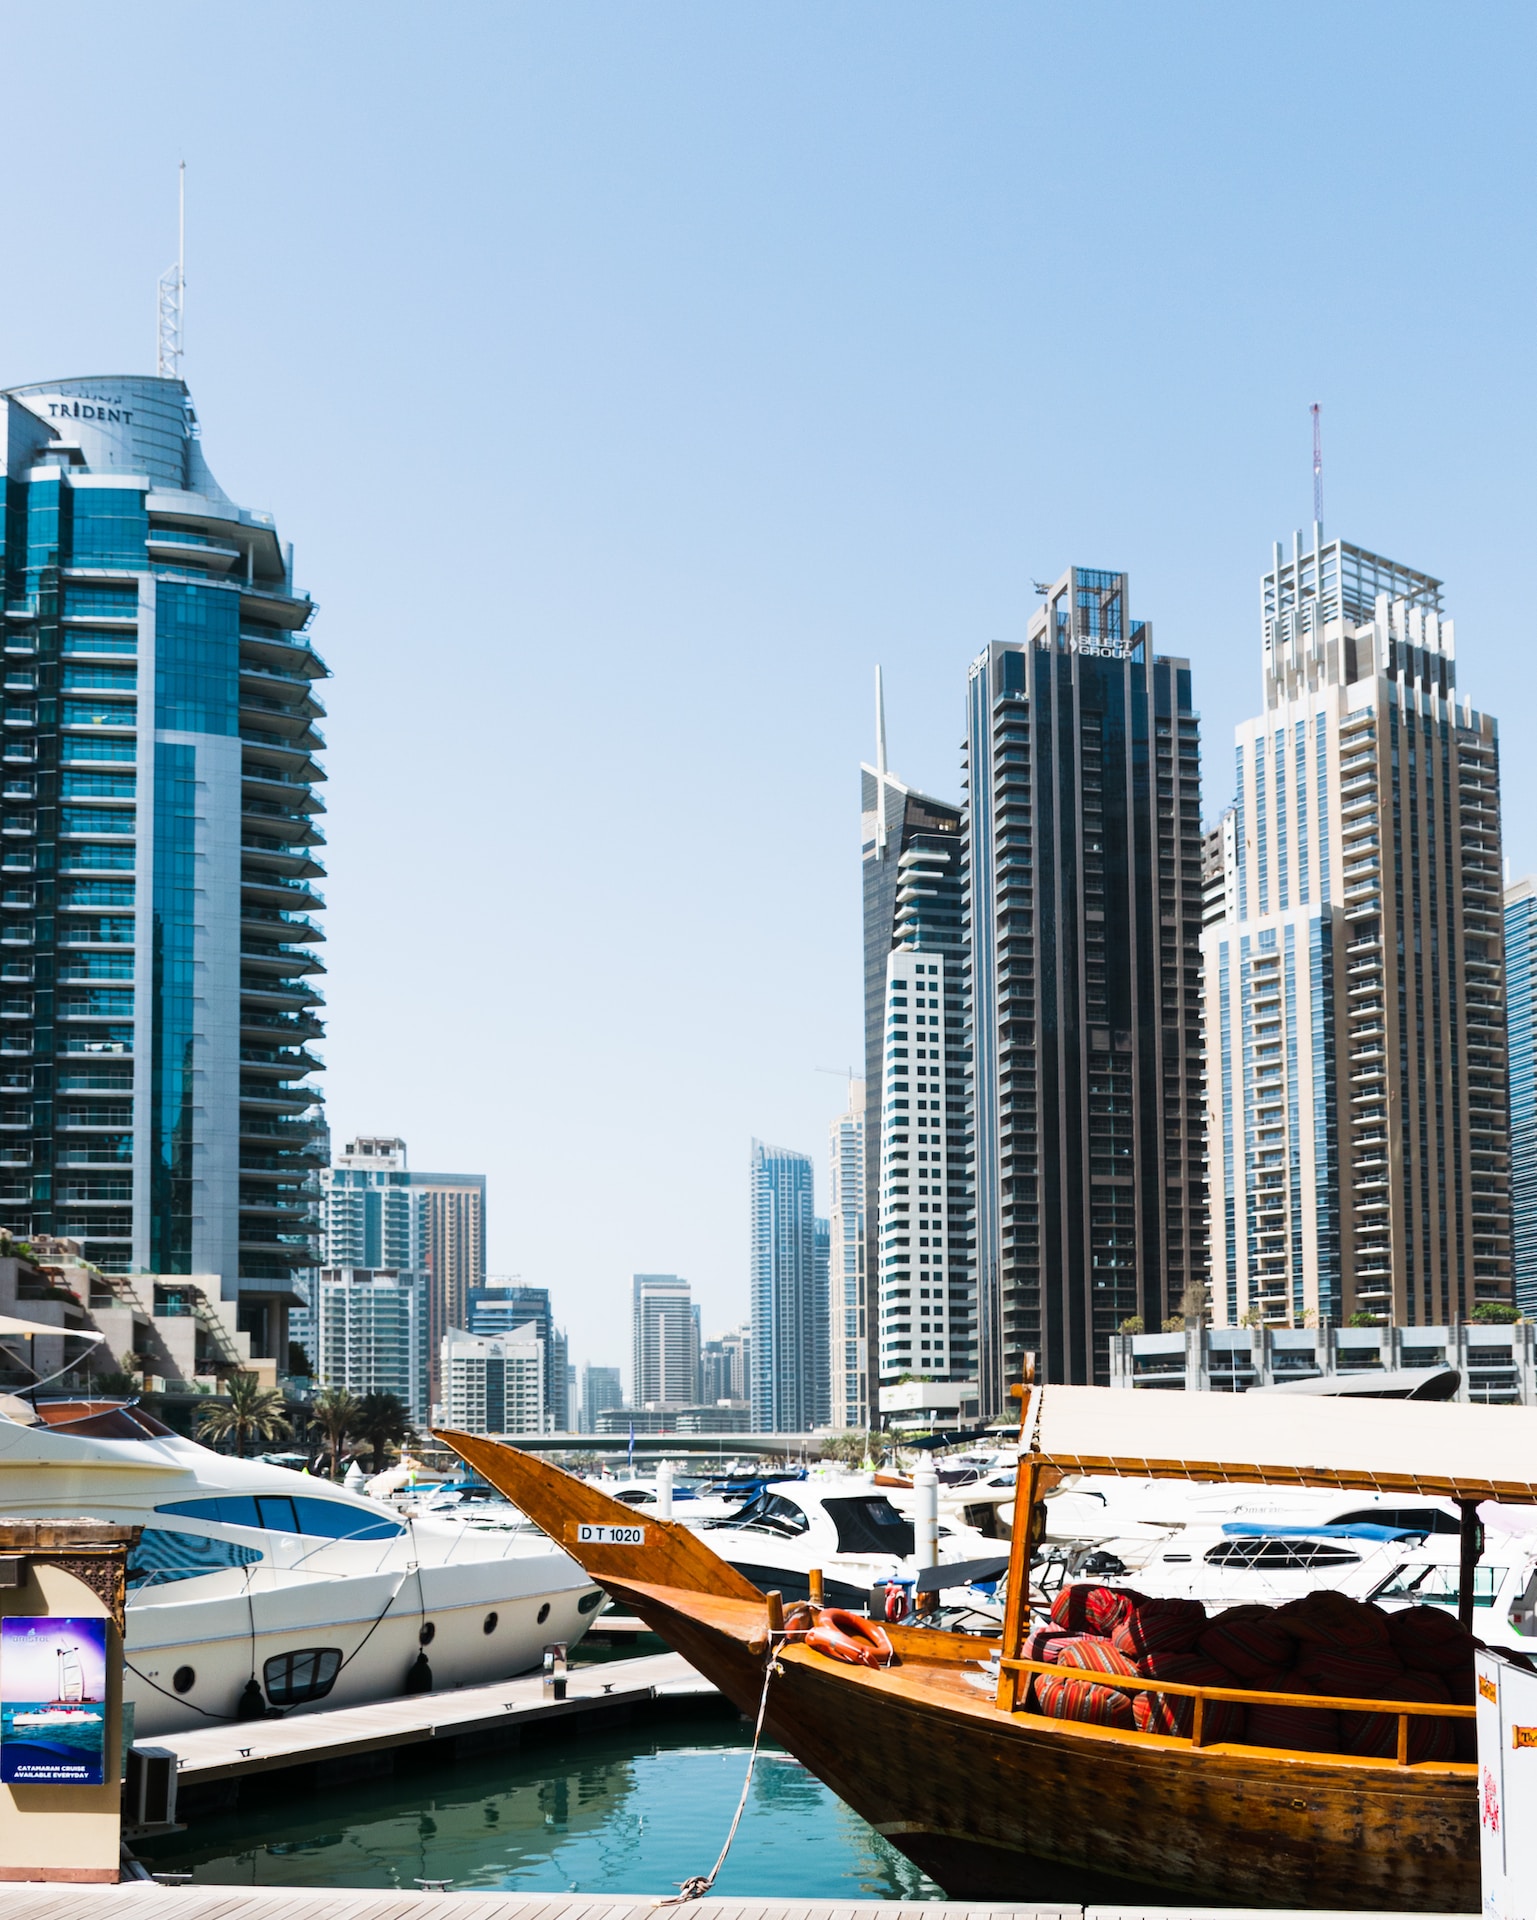 What are the most famous real estate agencies in Dubai?